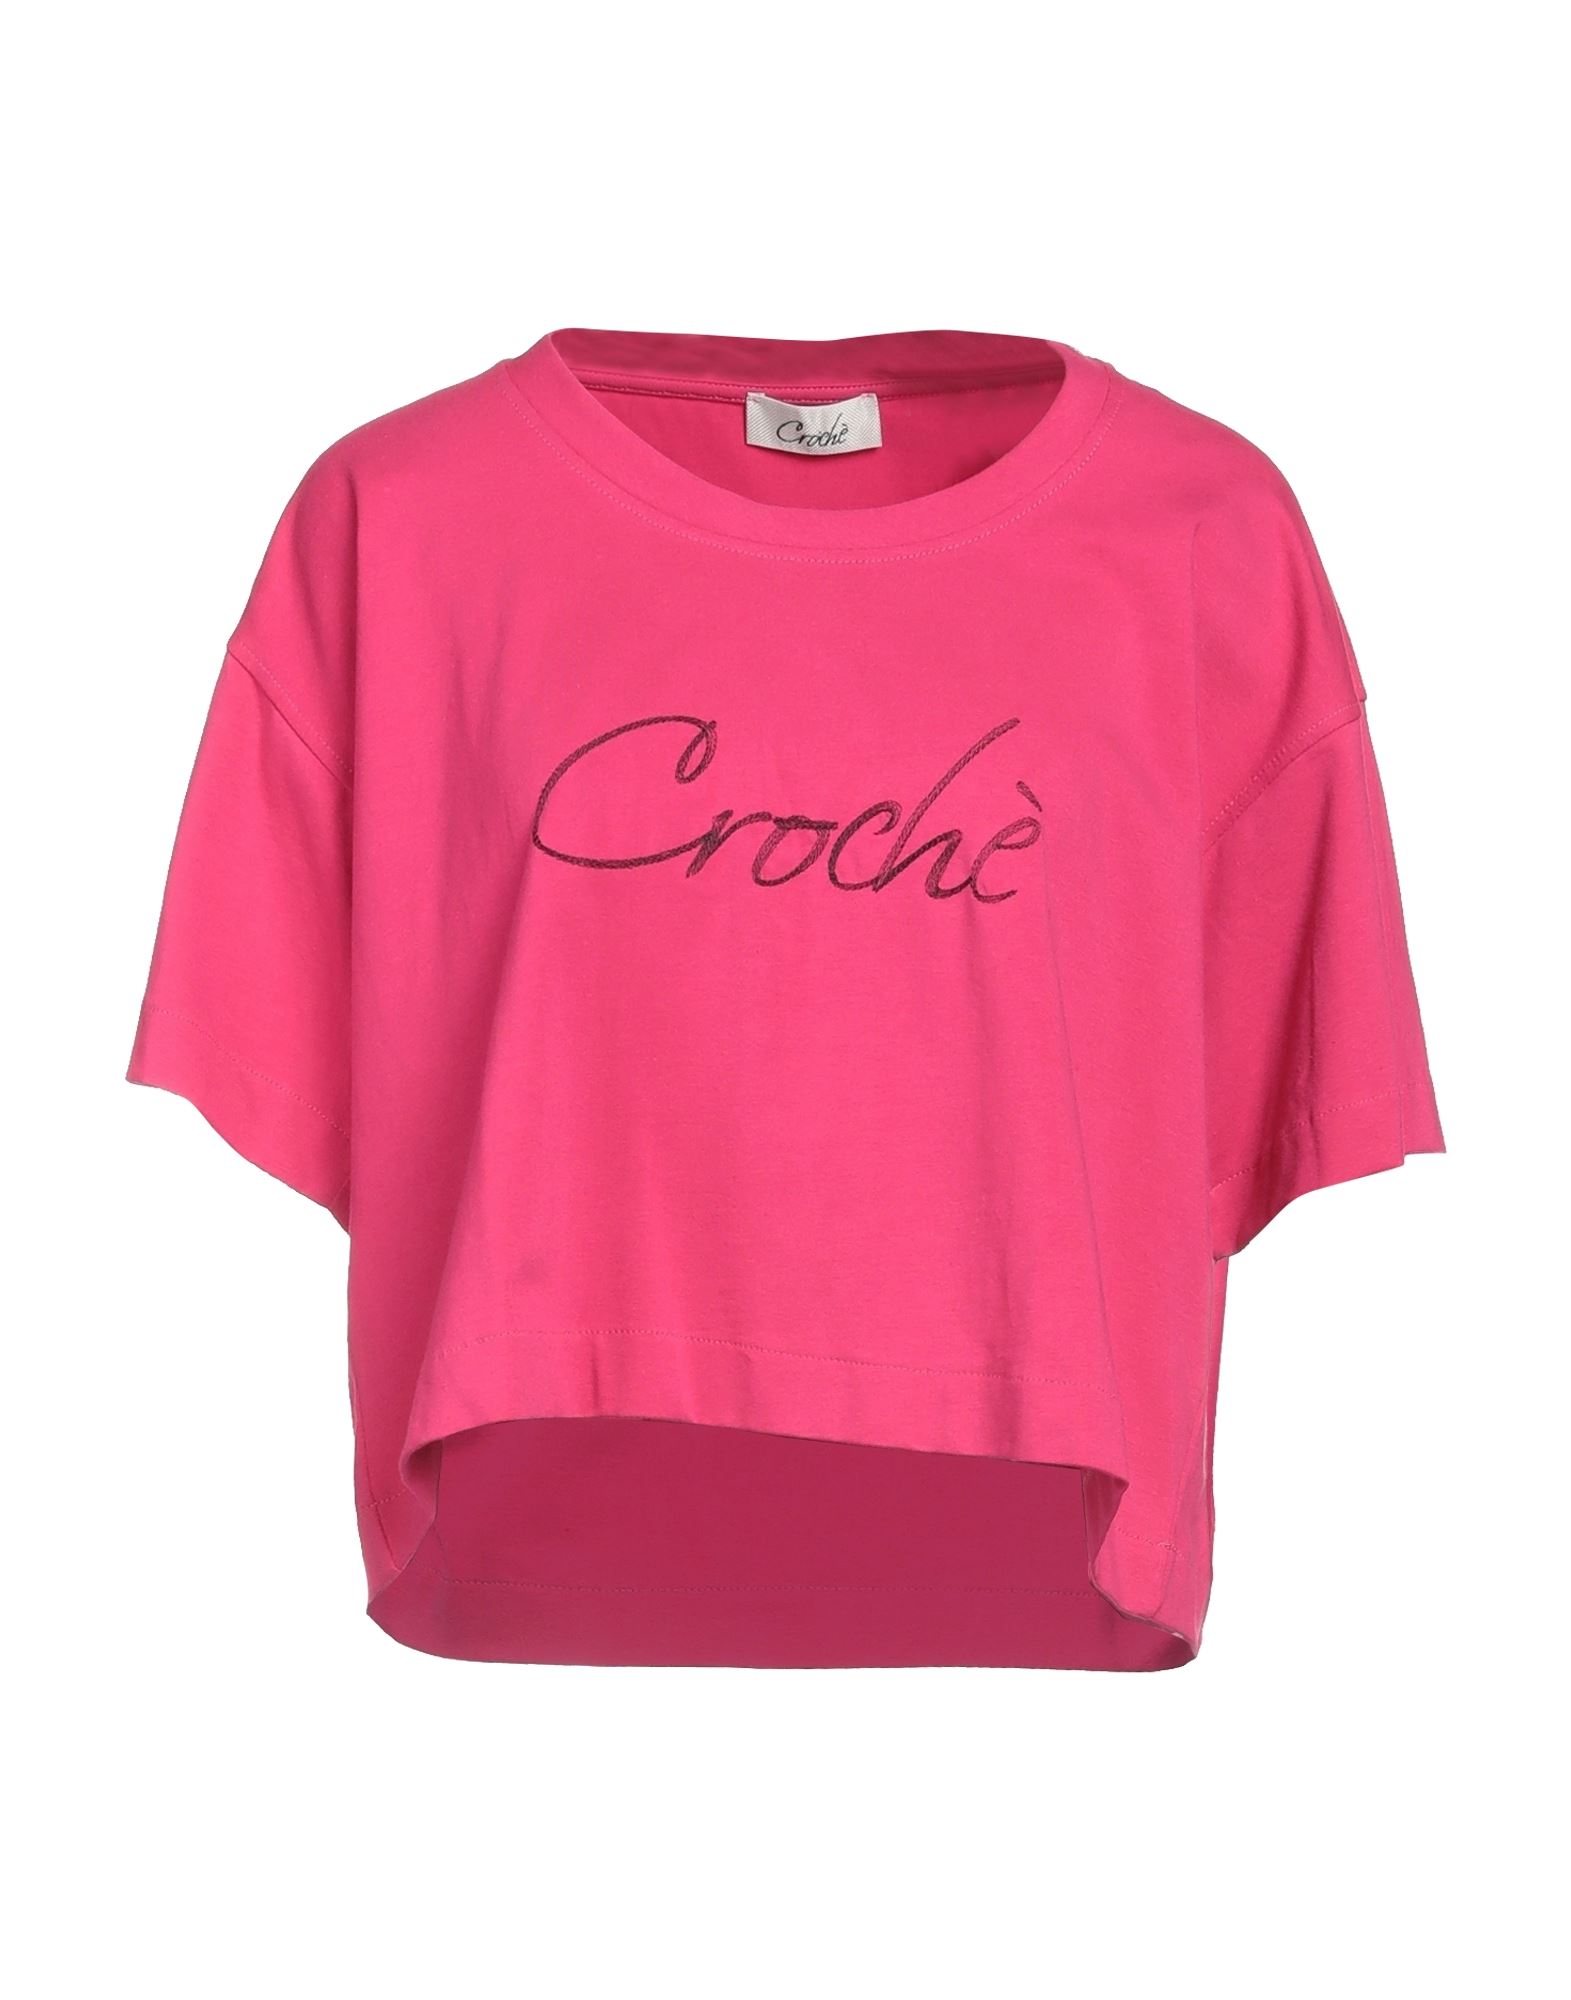 Croche T-shirts In Pink